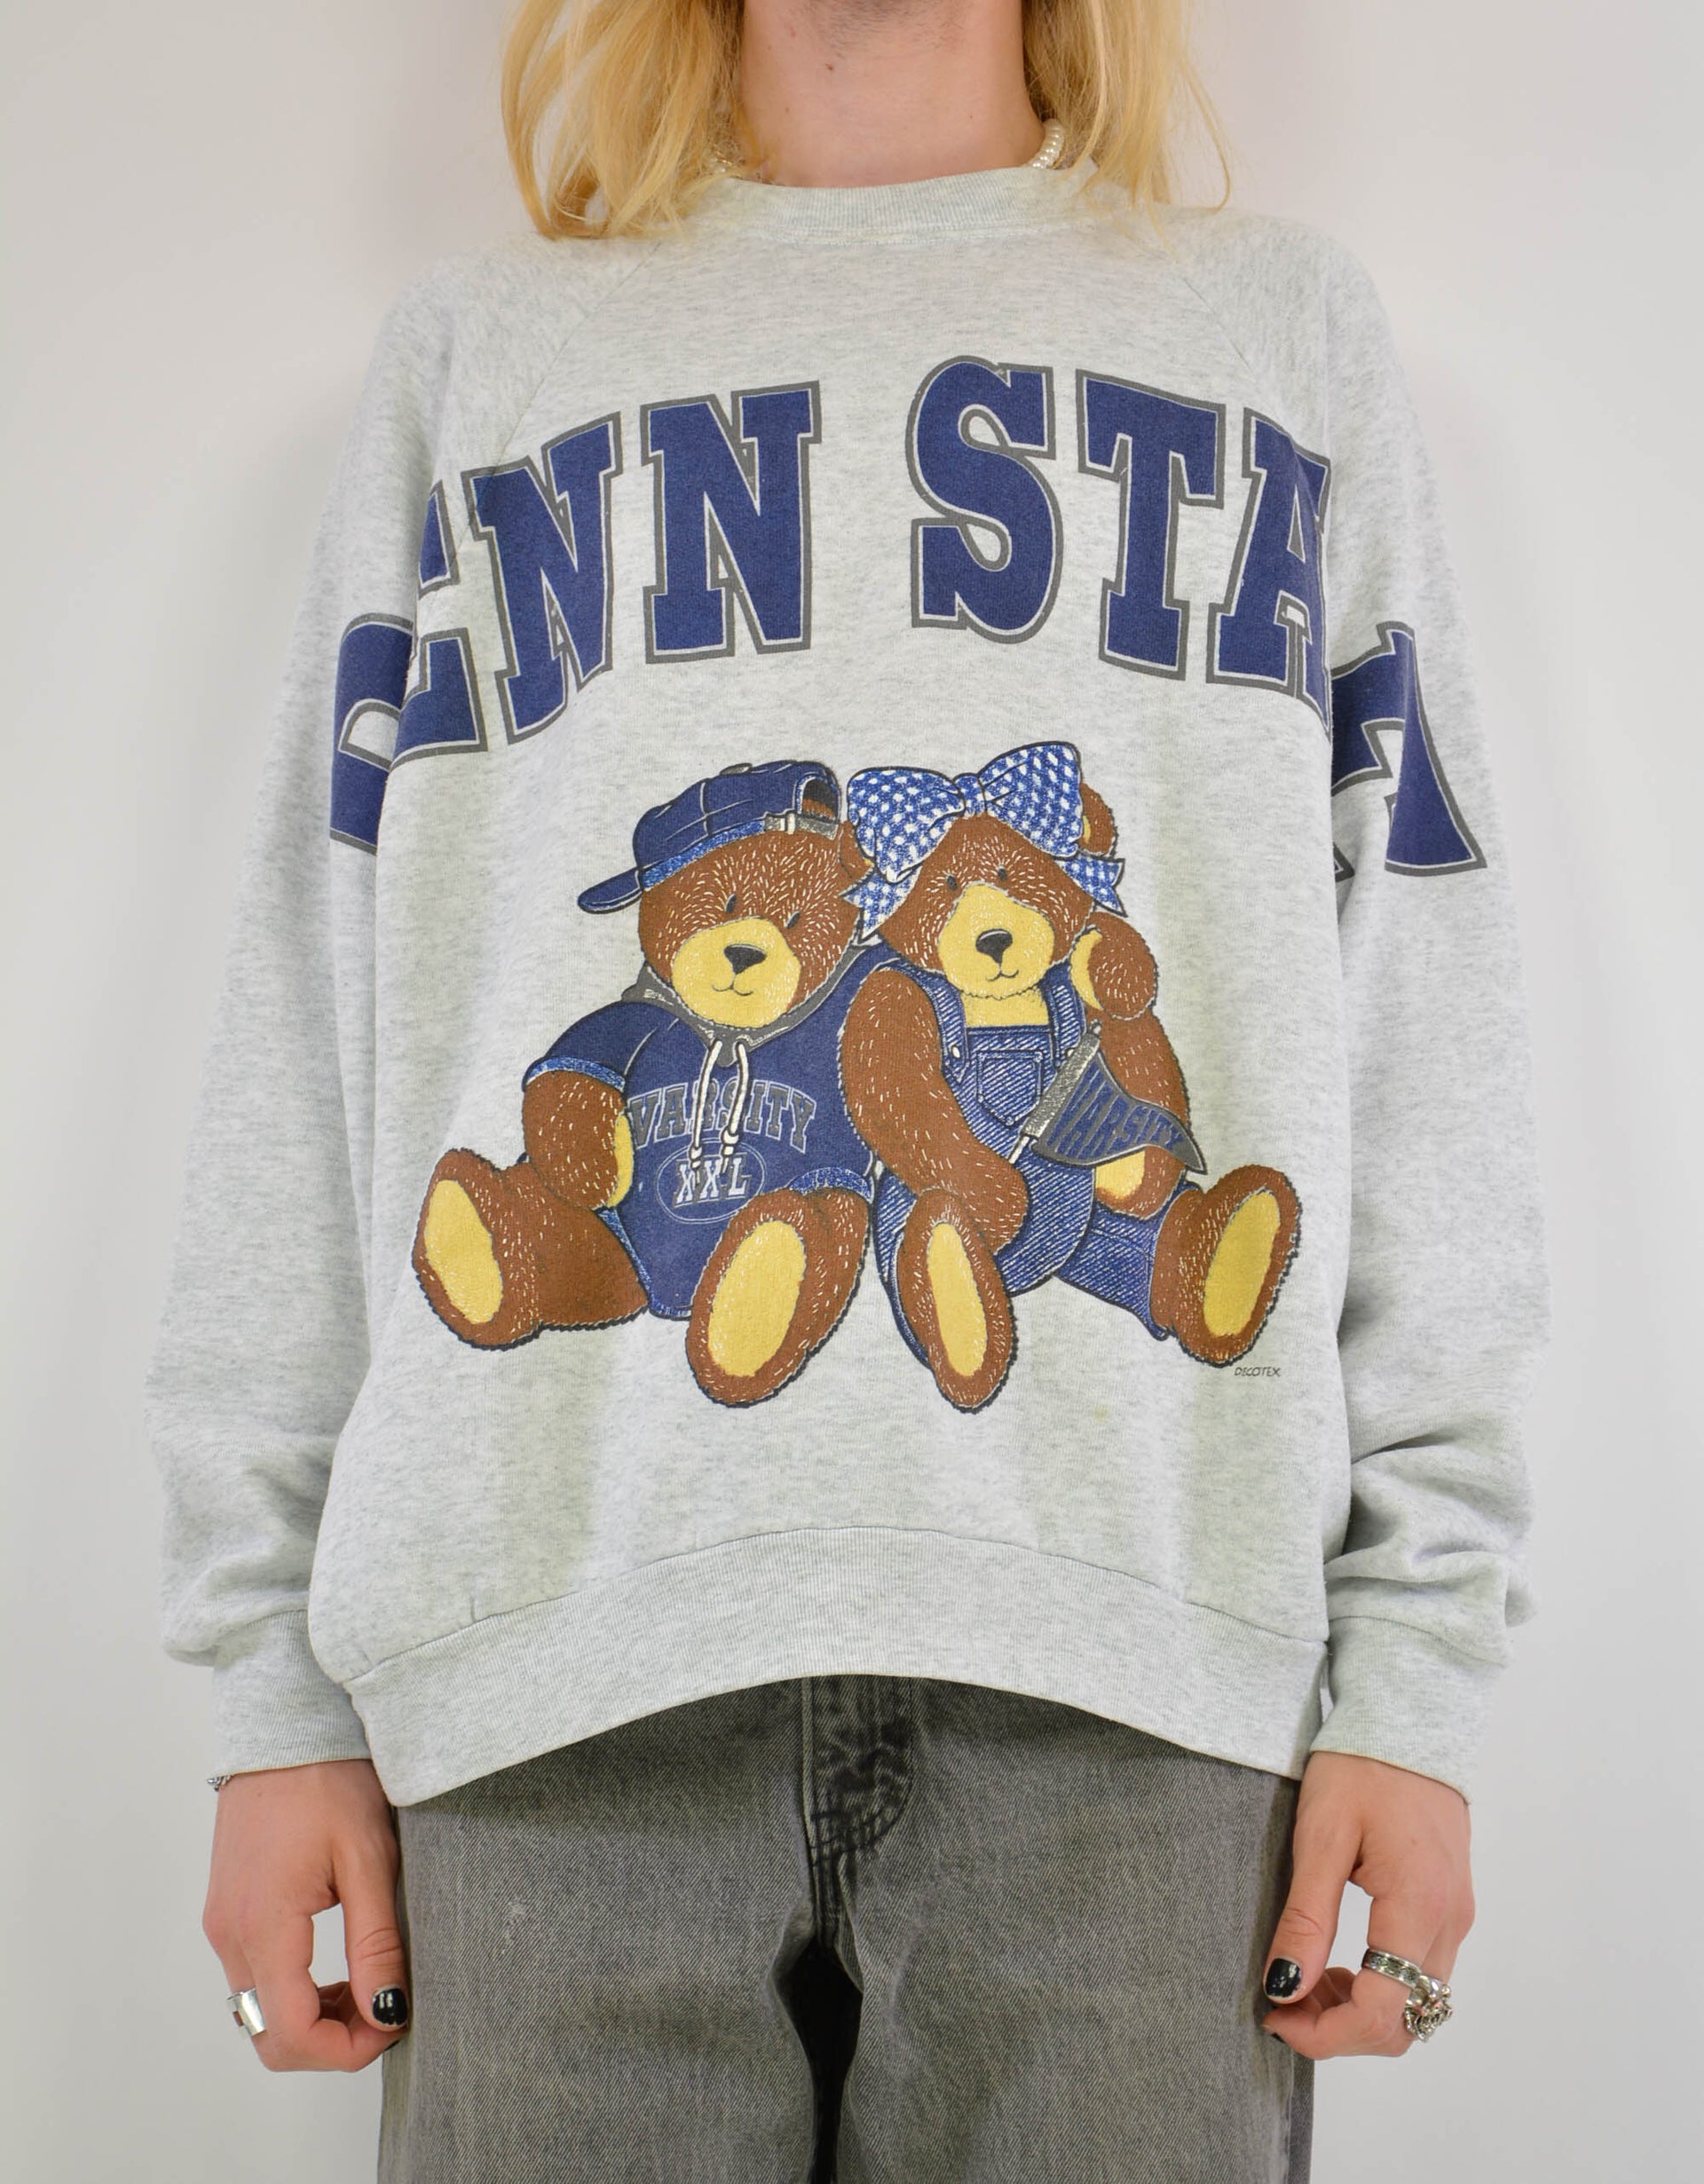 College sweater - PICKNWEIGHT - VINTAGE KILO STORE